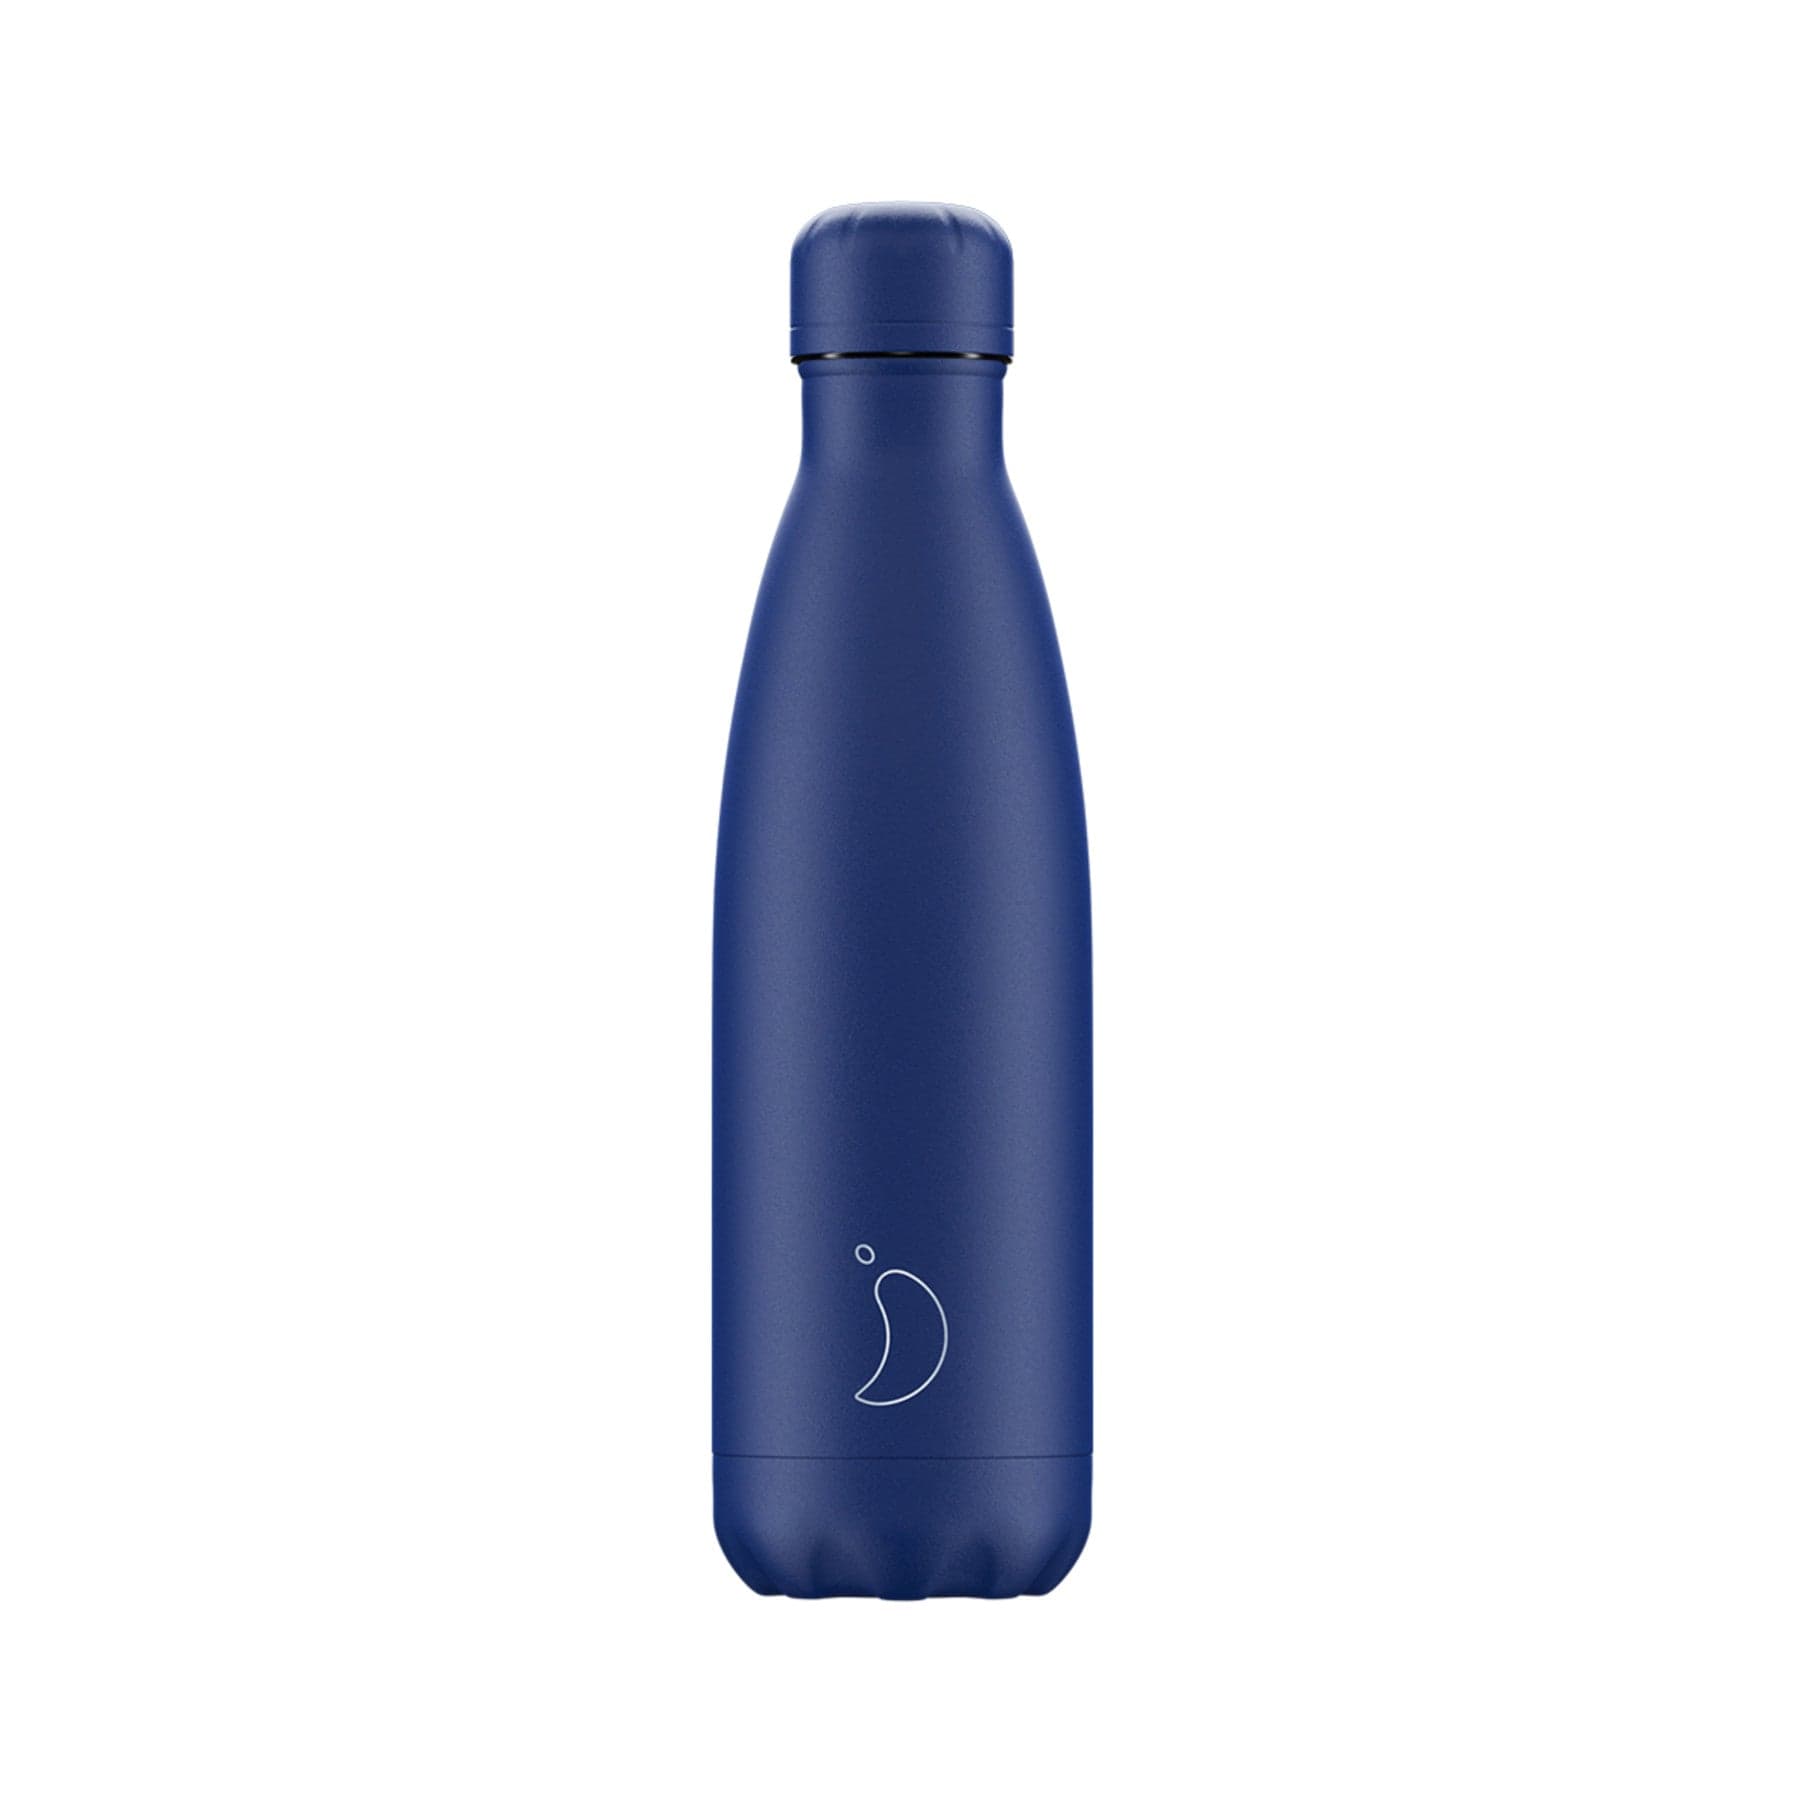 Blue insulated stainless steel water bottle on white background